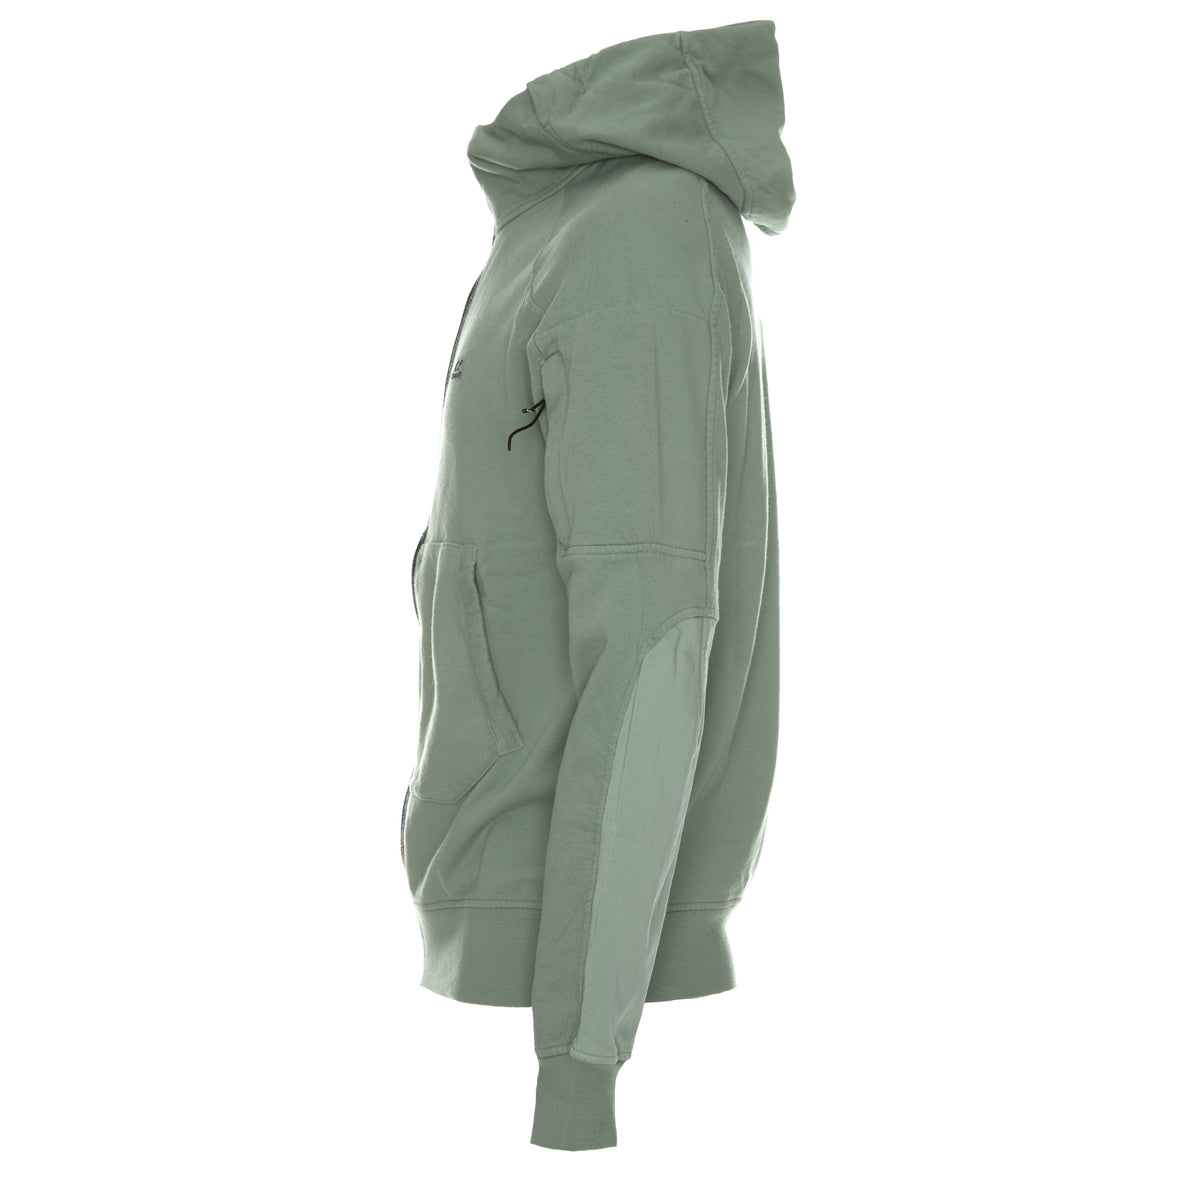 Garment Dyed Open Hoodie